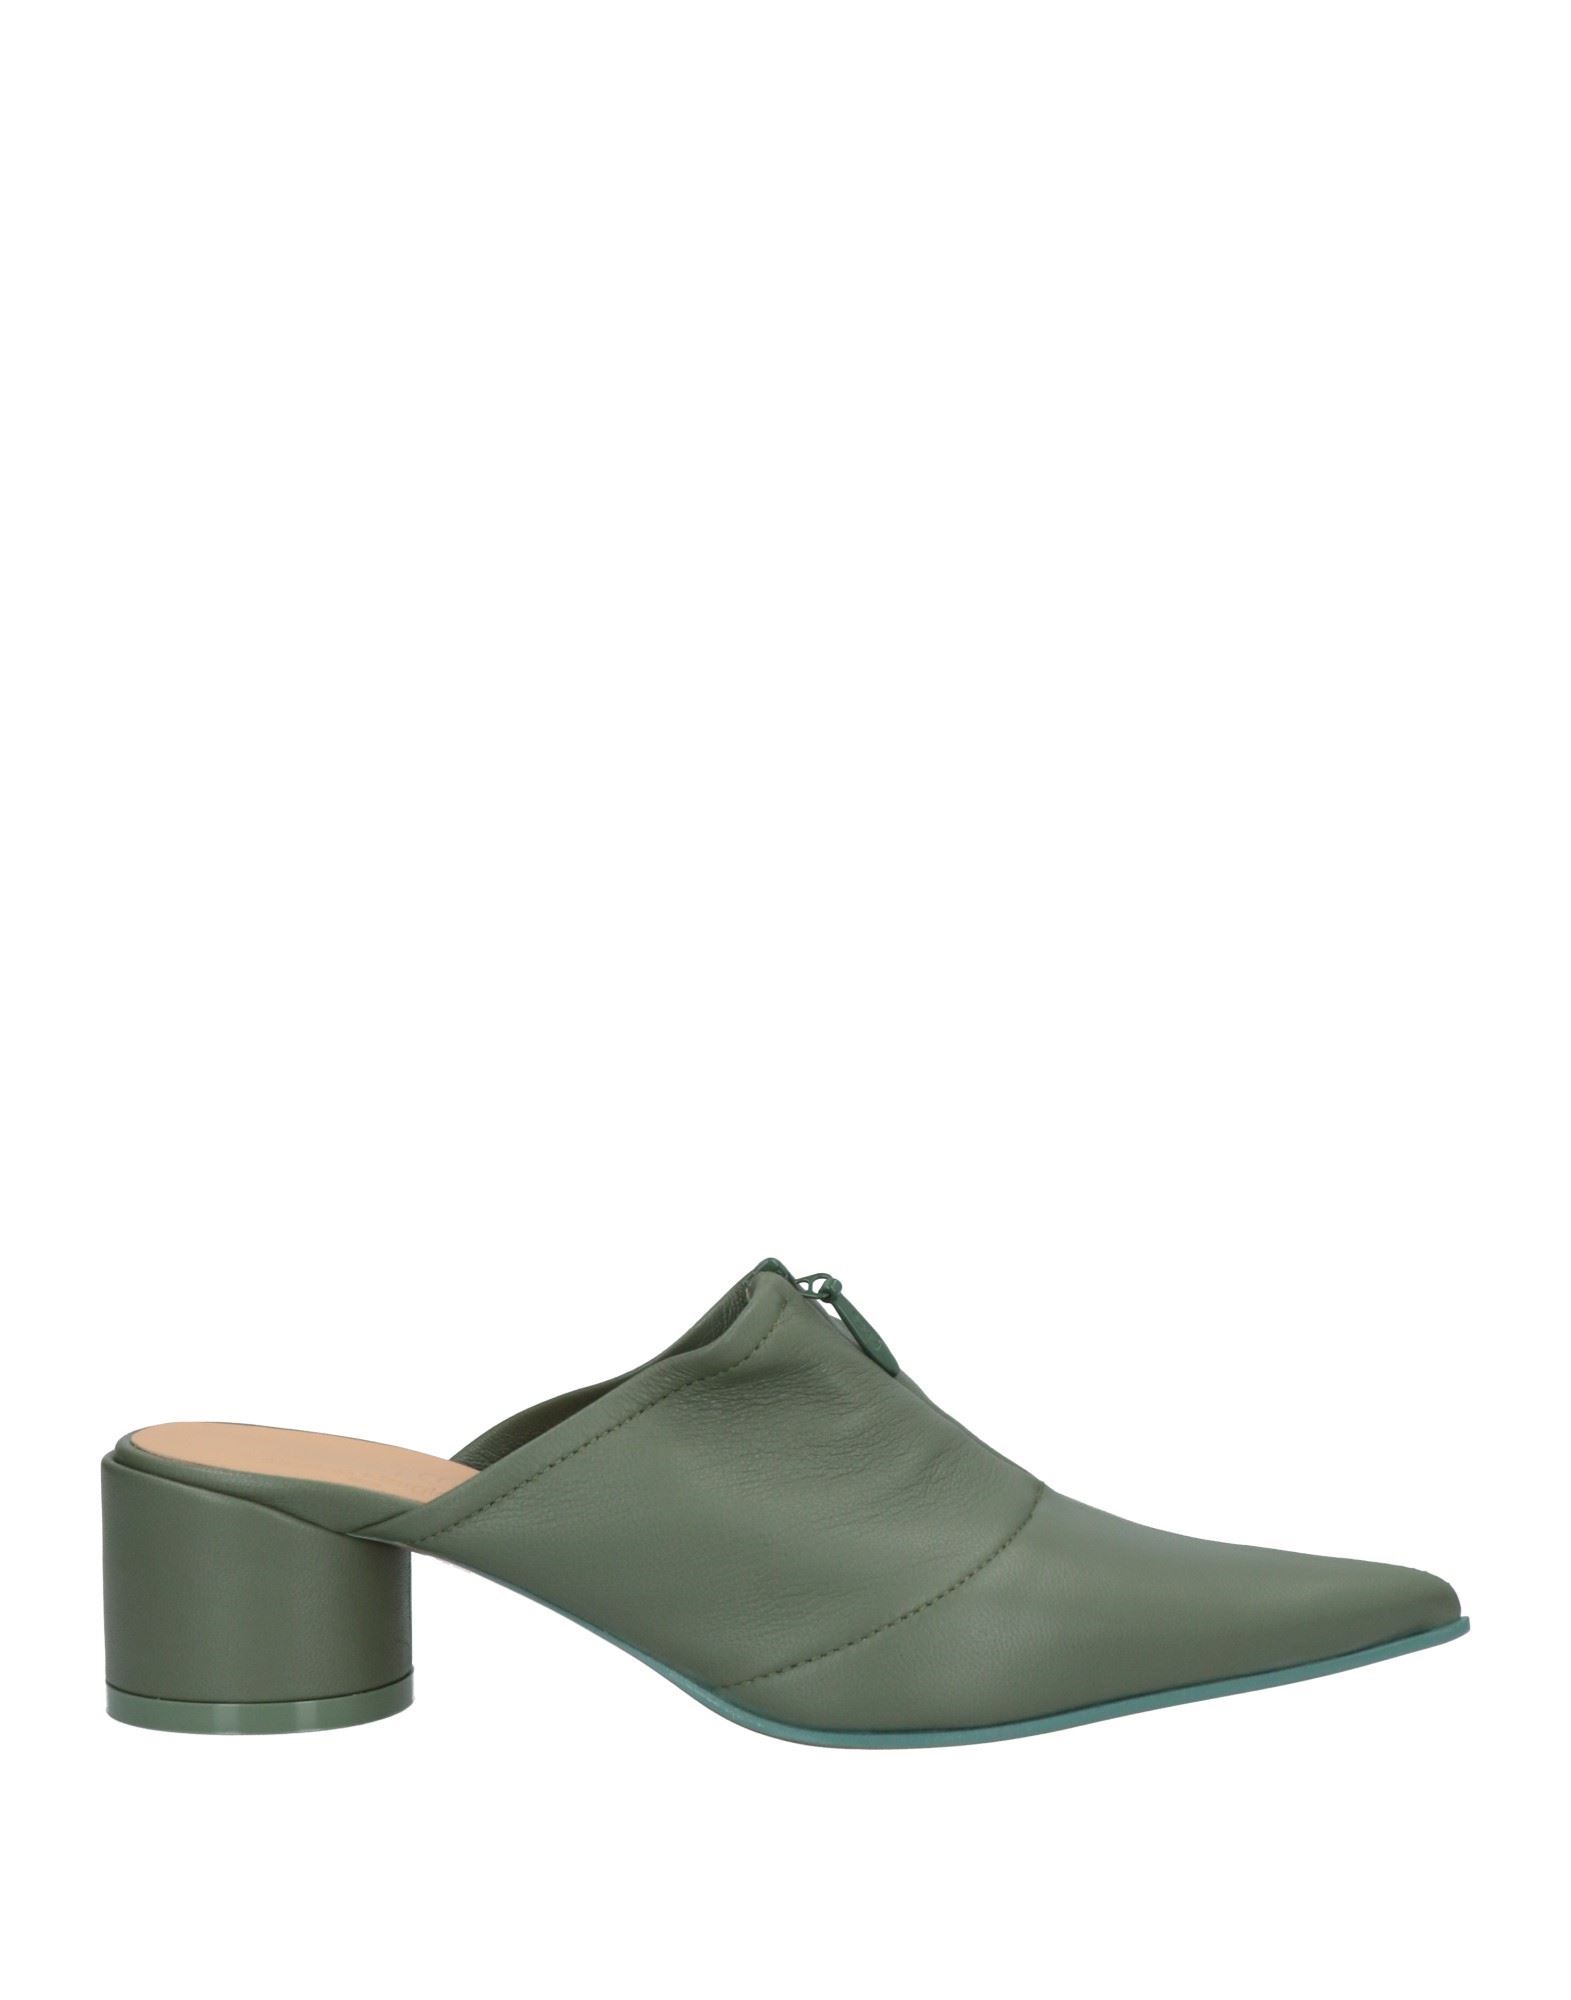 Mm6 Maison Margiela Green Pointed Mules